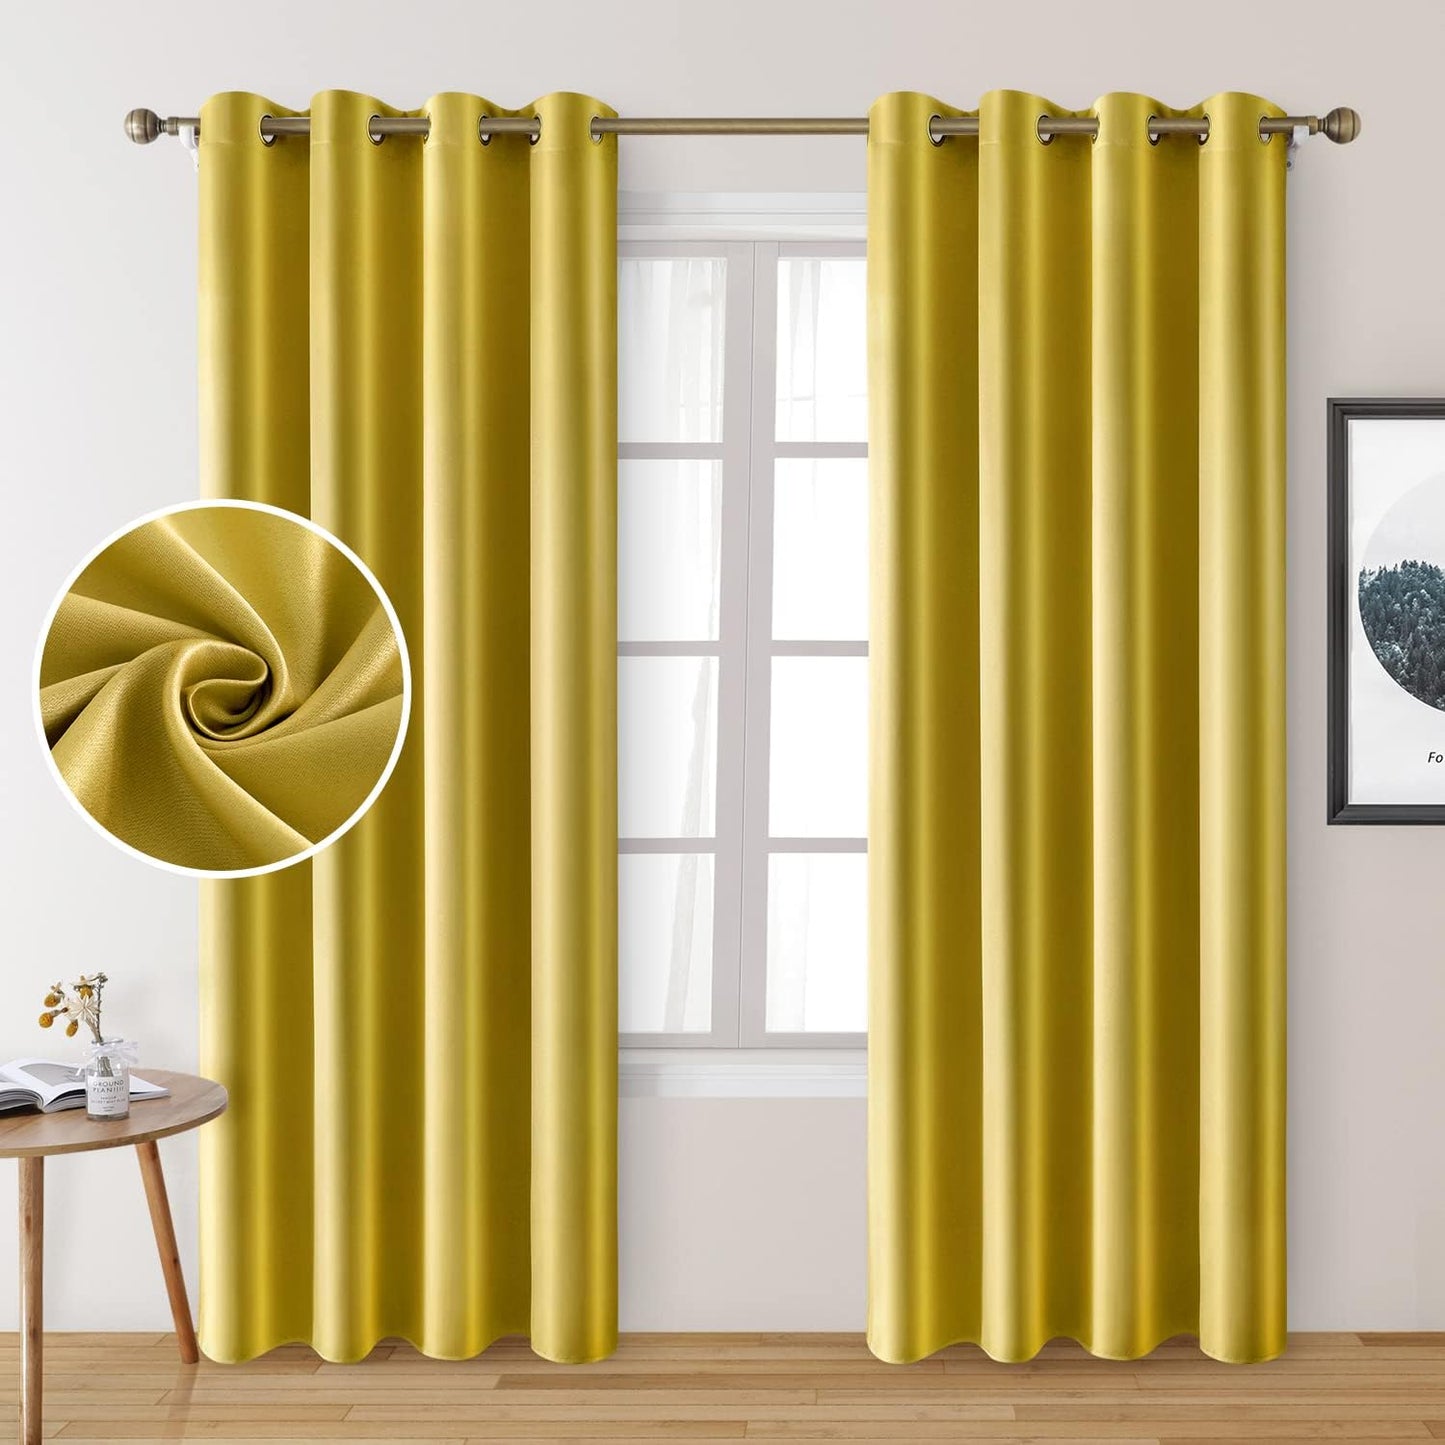 HOMEIDEAS Gold Blackout Curtains, Faux Silk for Bedroom 52 X 84 Inch Room Darkening Satin Thermal Insulated Drapes for Window, Indoor, Living Room, 2 Panels  HOMEIDEAS Mustard Yellow 52" X 84" 